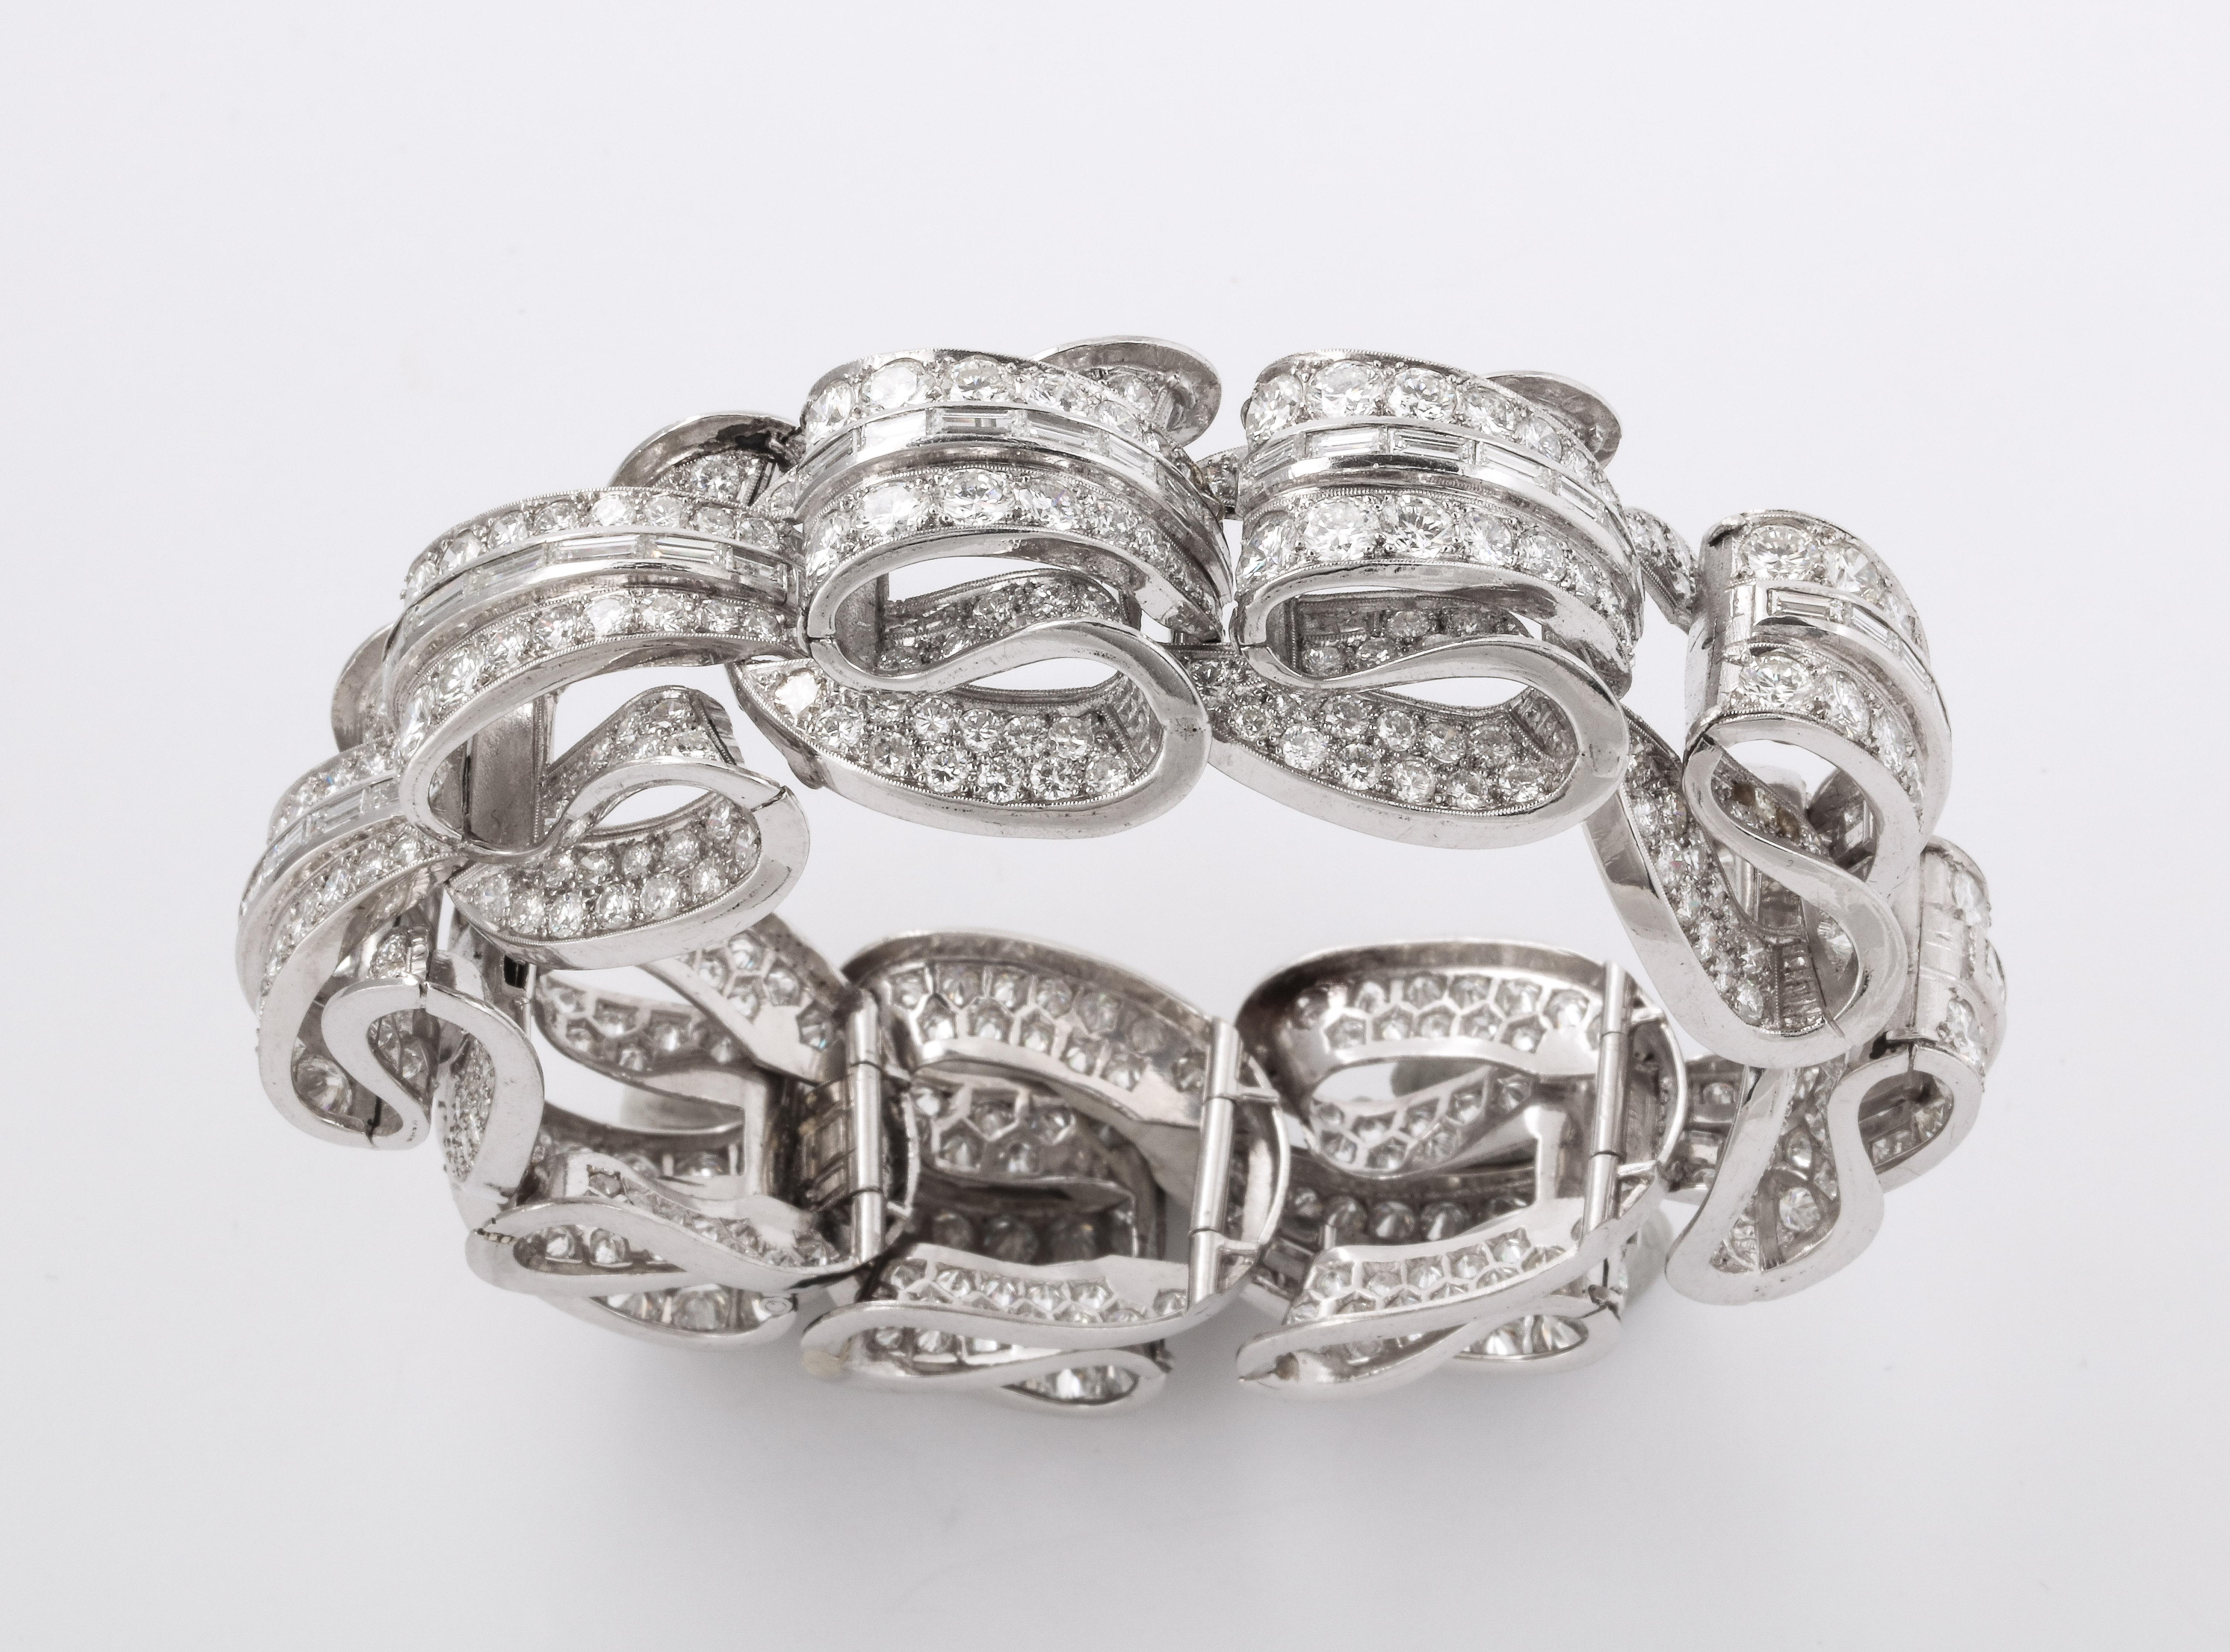 Incredible Geometric Art Deco Diamond Bracelet In Excellent Condition For Sale In New York, NY